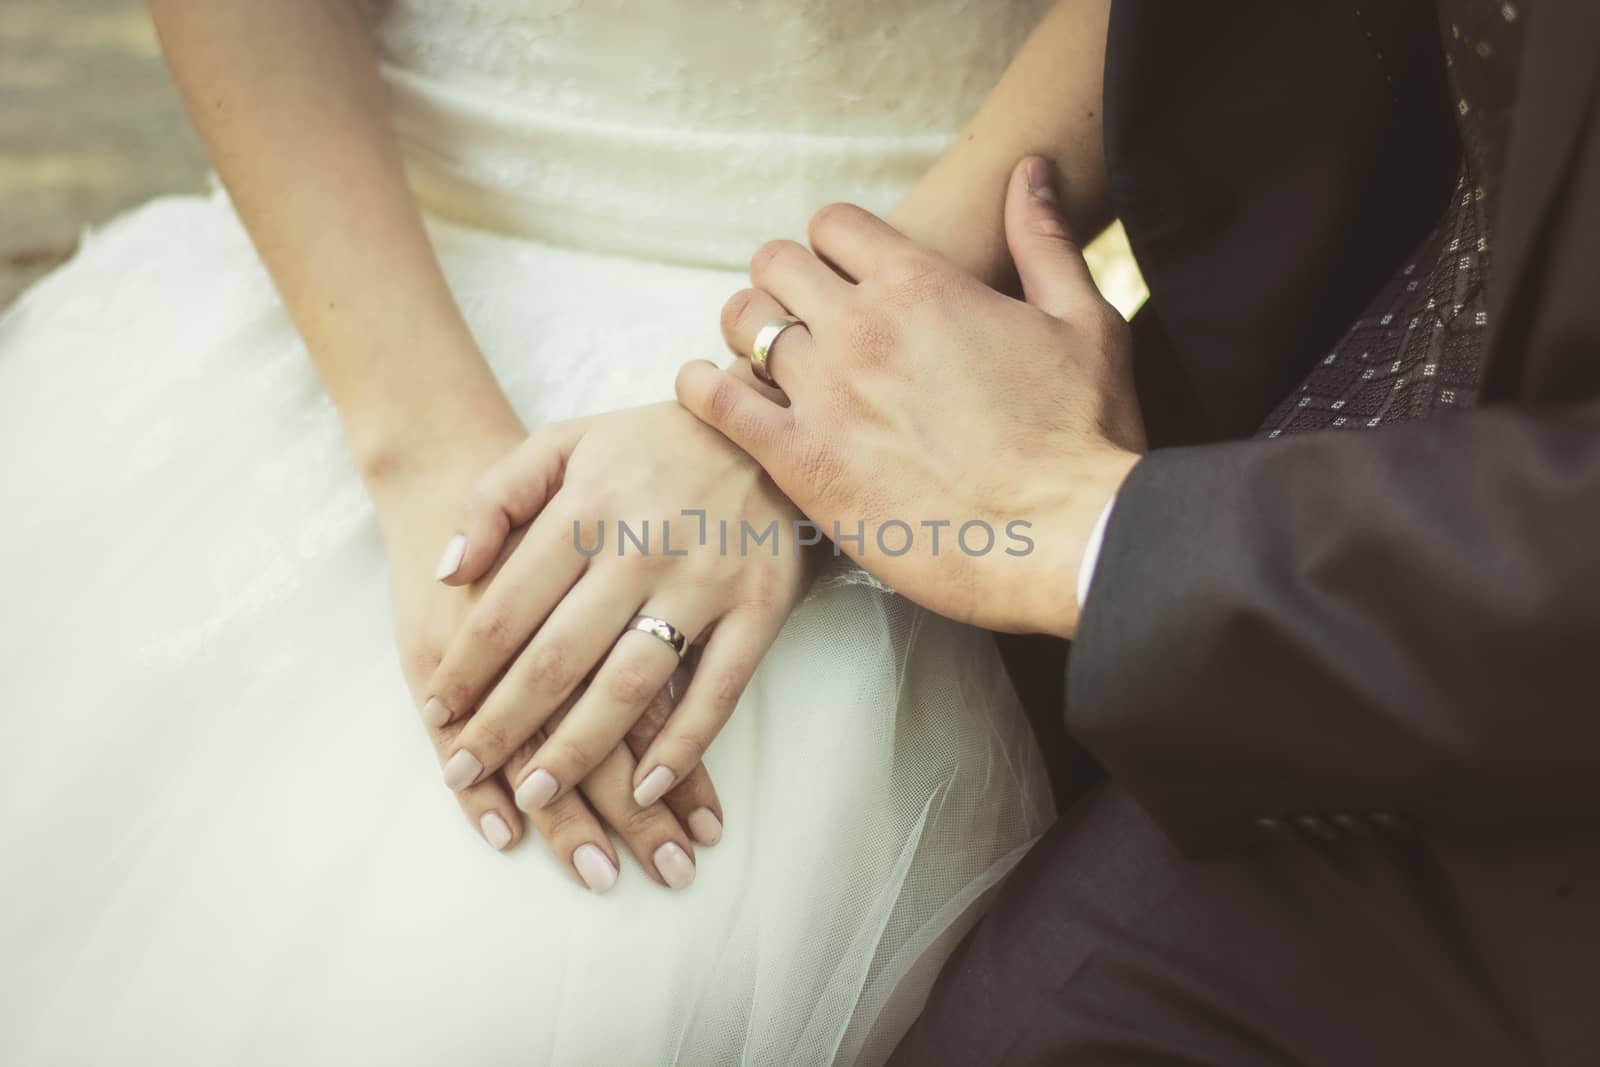 Unrecognizable couple of newly-married wearing wedding rings